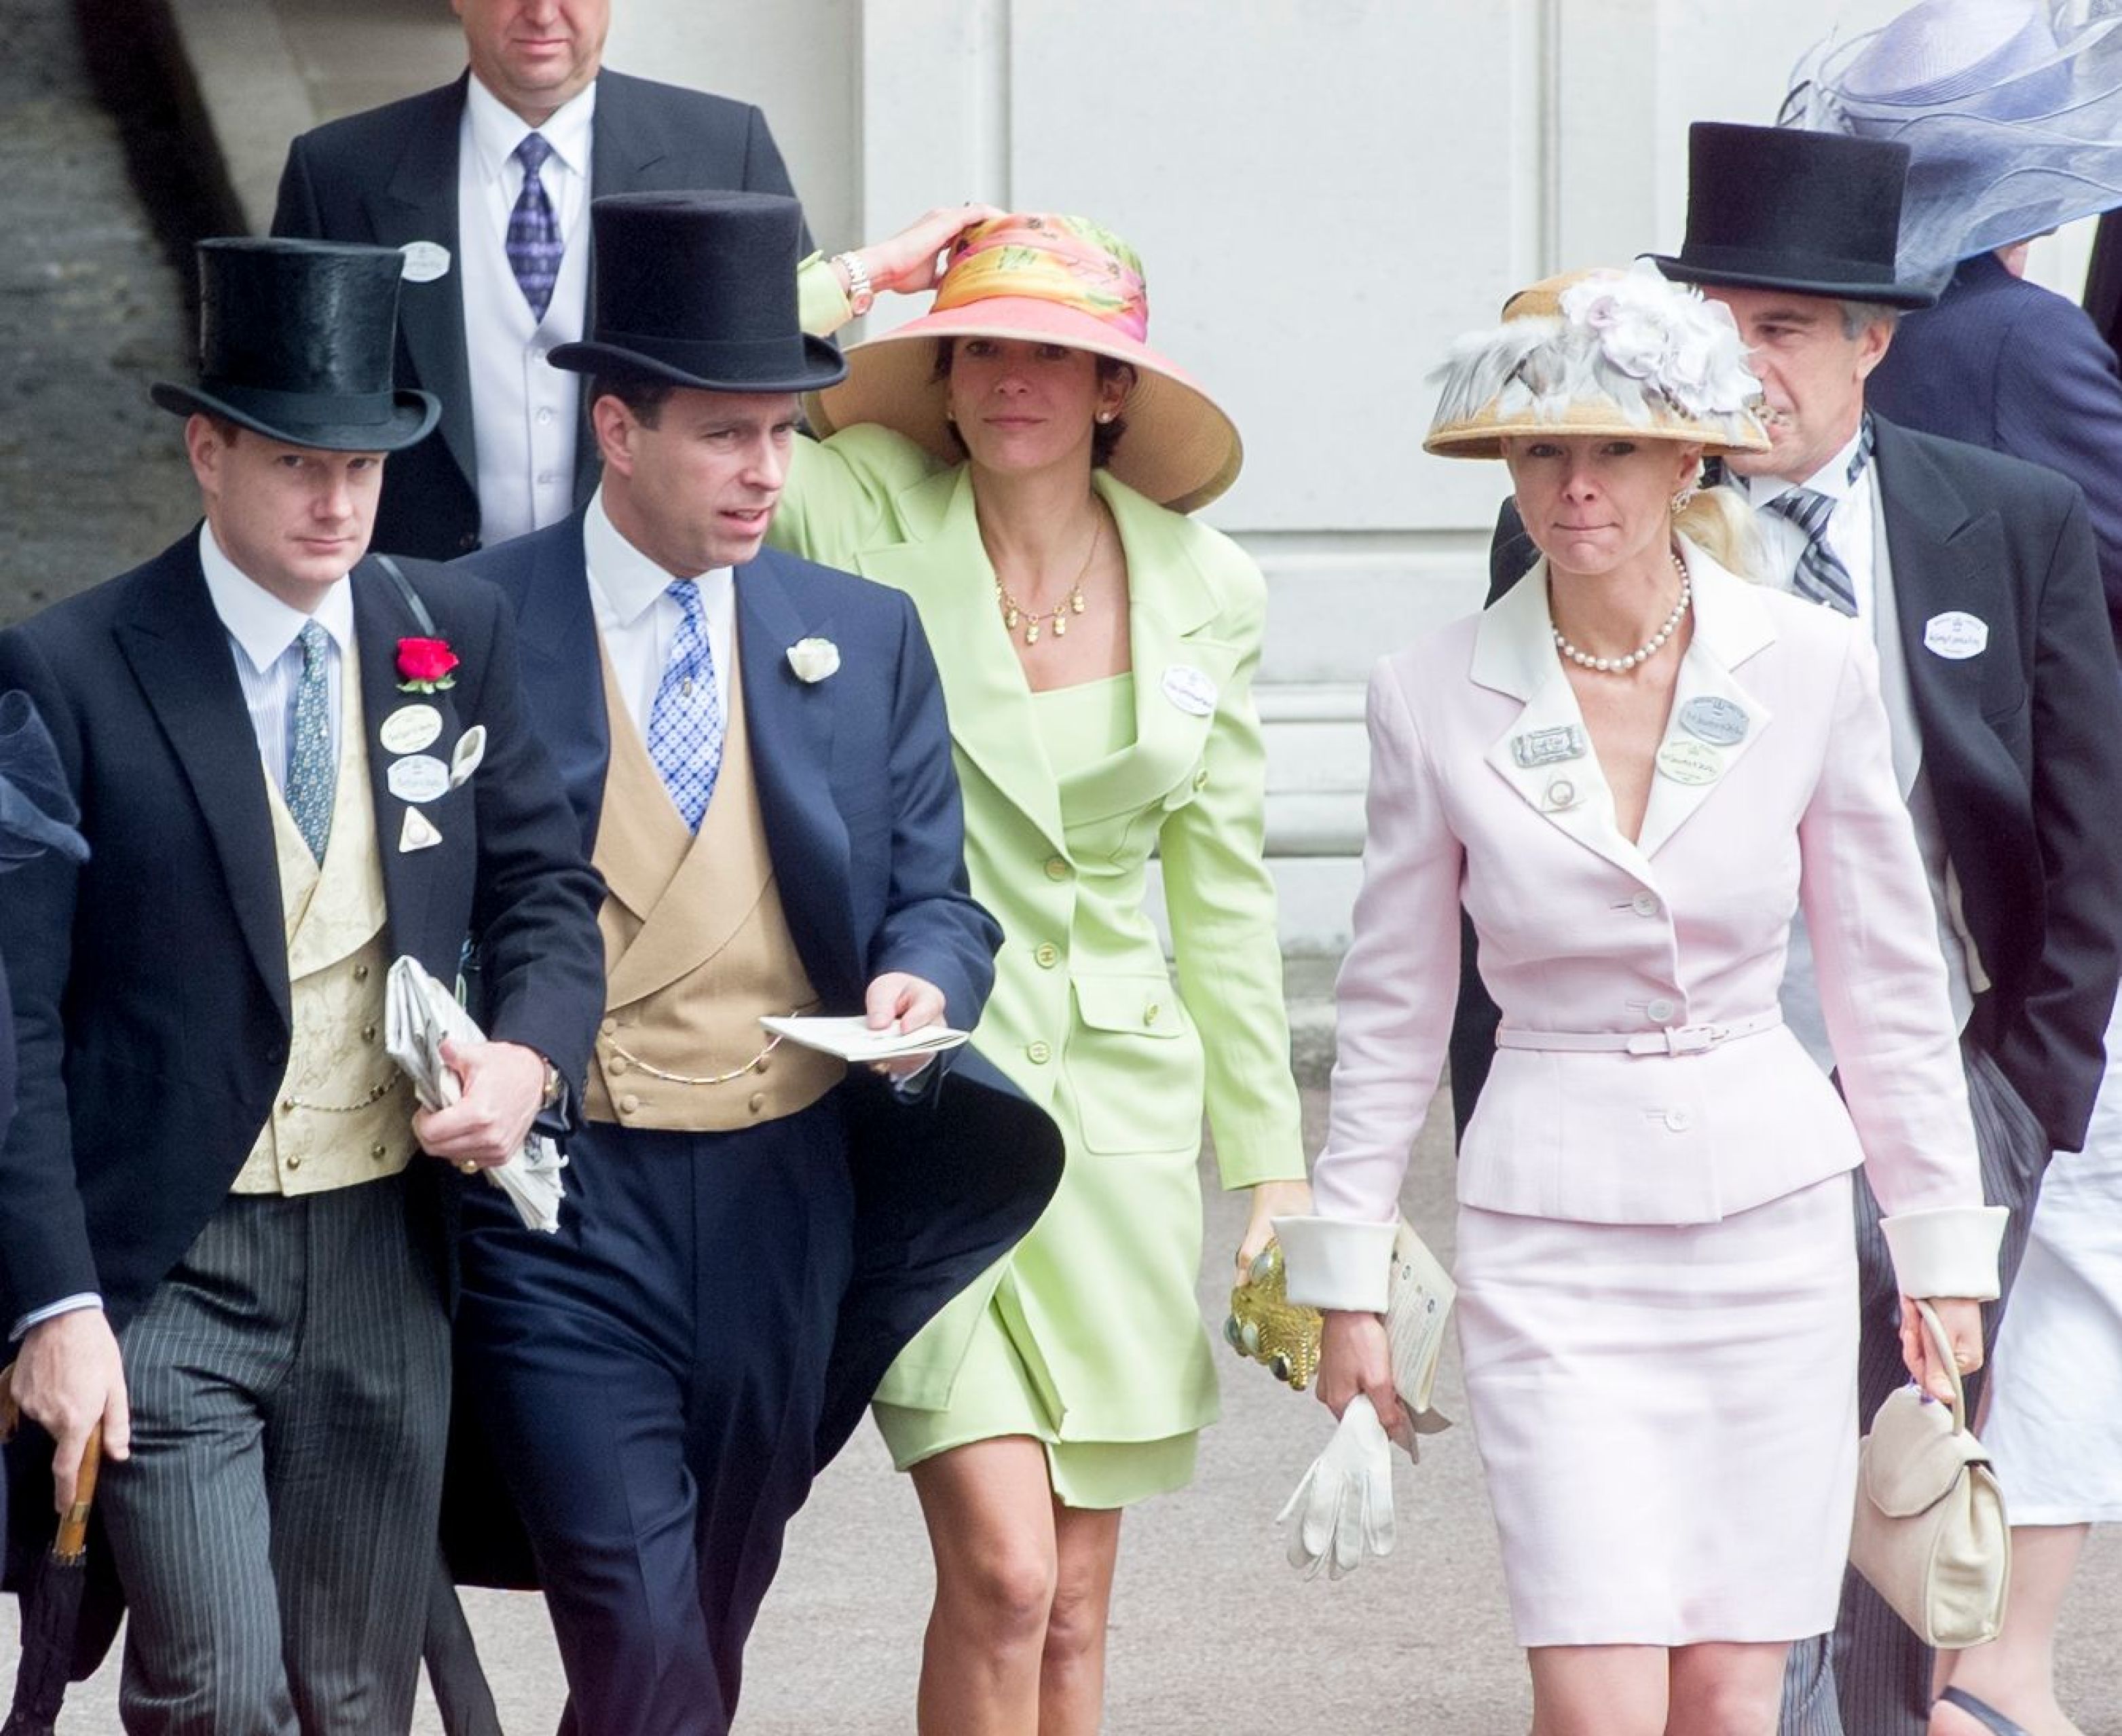 Prince Andrew with Maxwell and Epstein (rear right, with black/grey stiped tie) and Caroline Stanley (in pink)